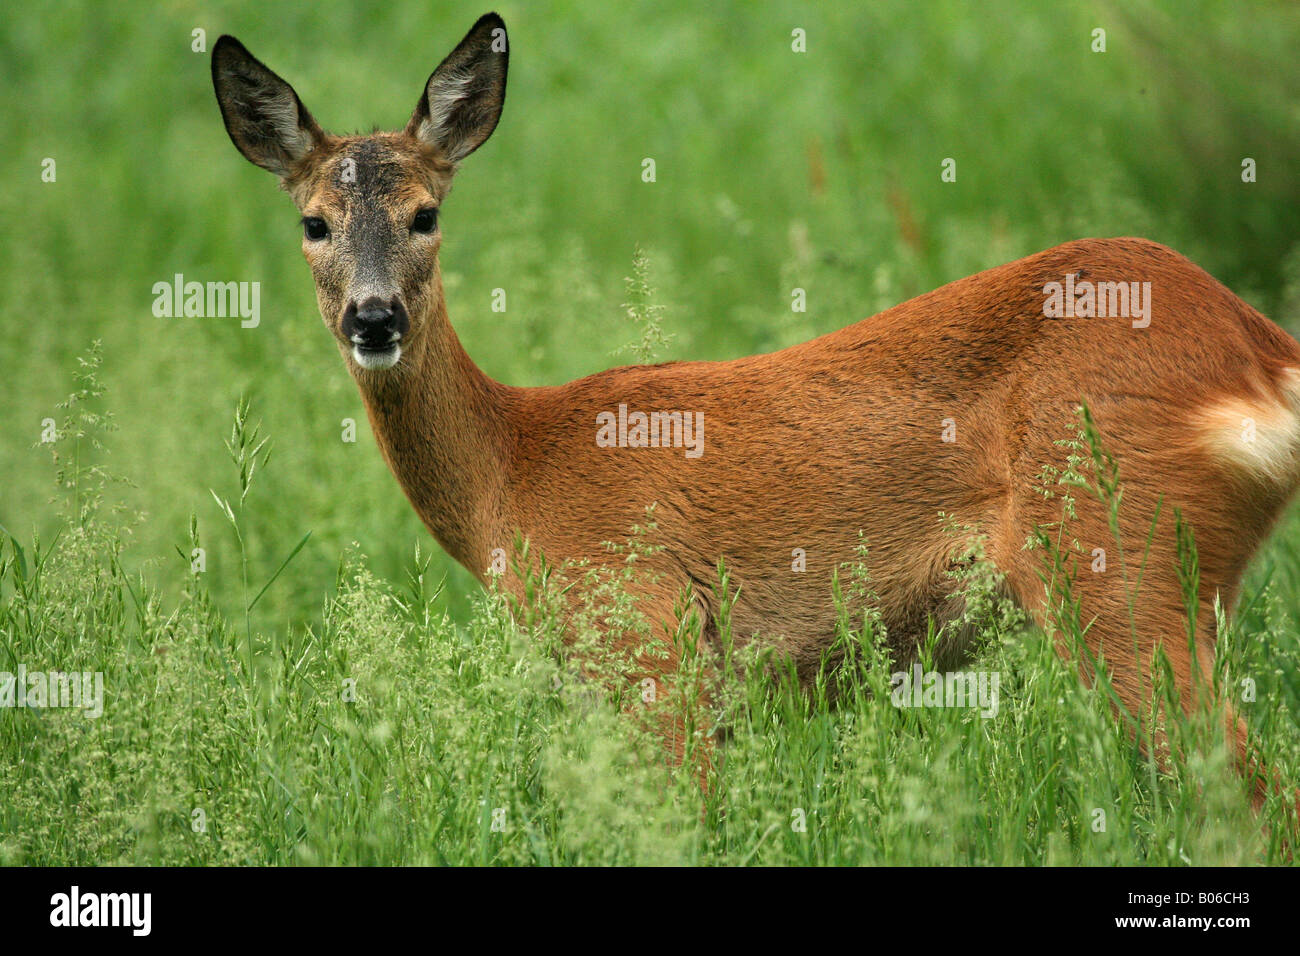 Deer in the grass Stock Photo